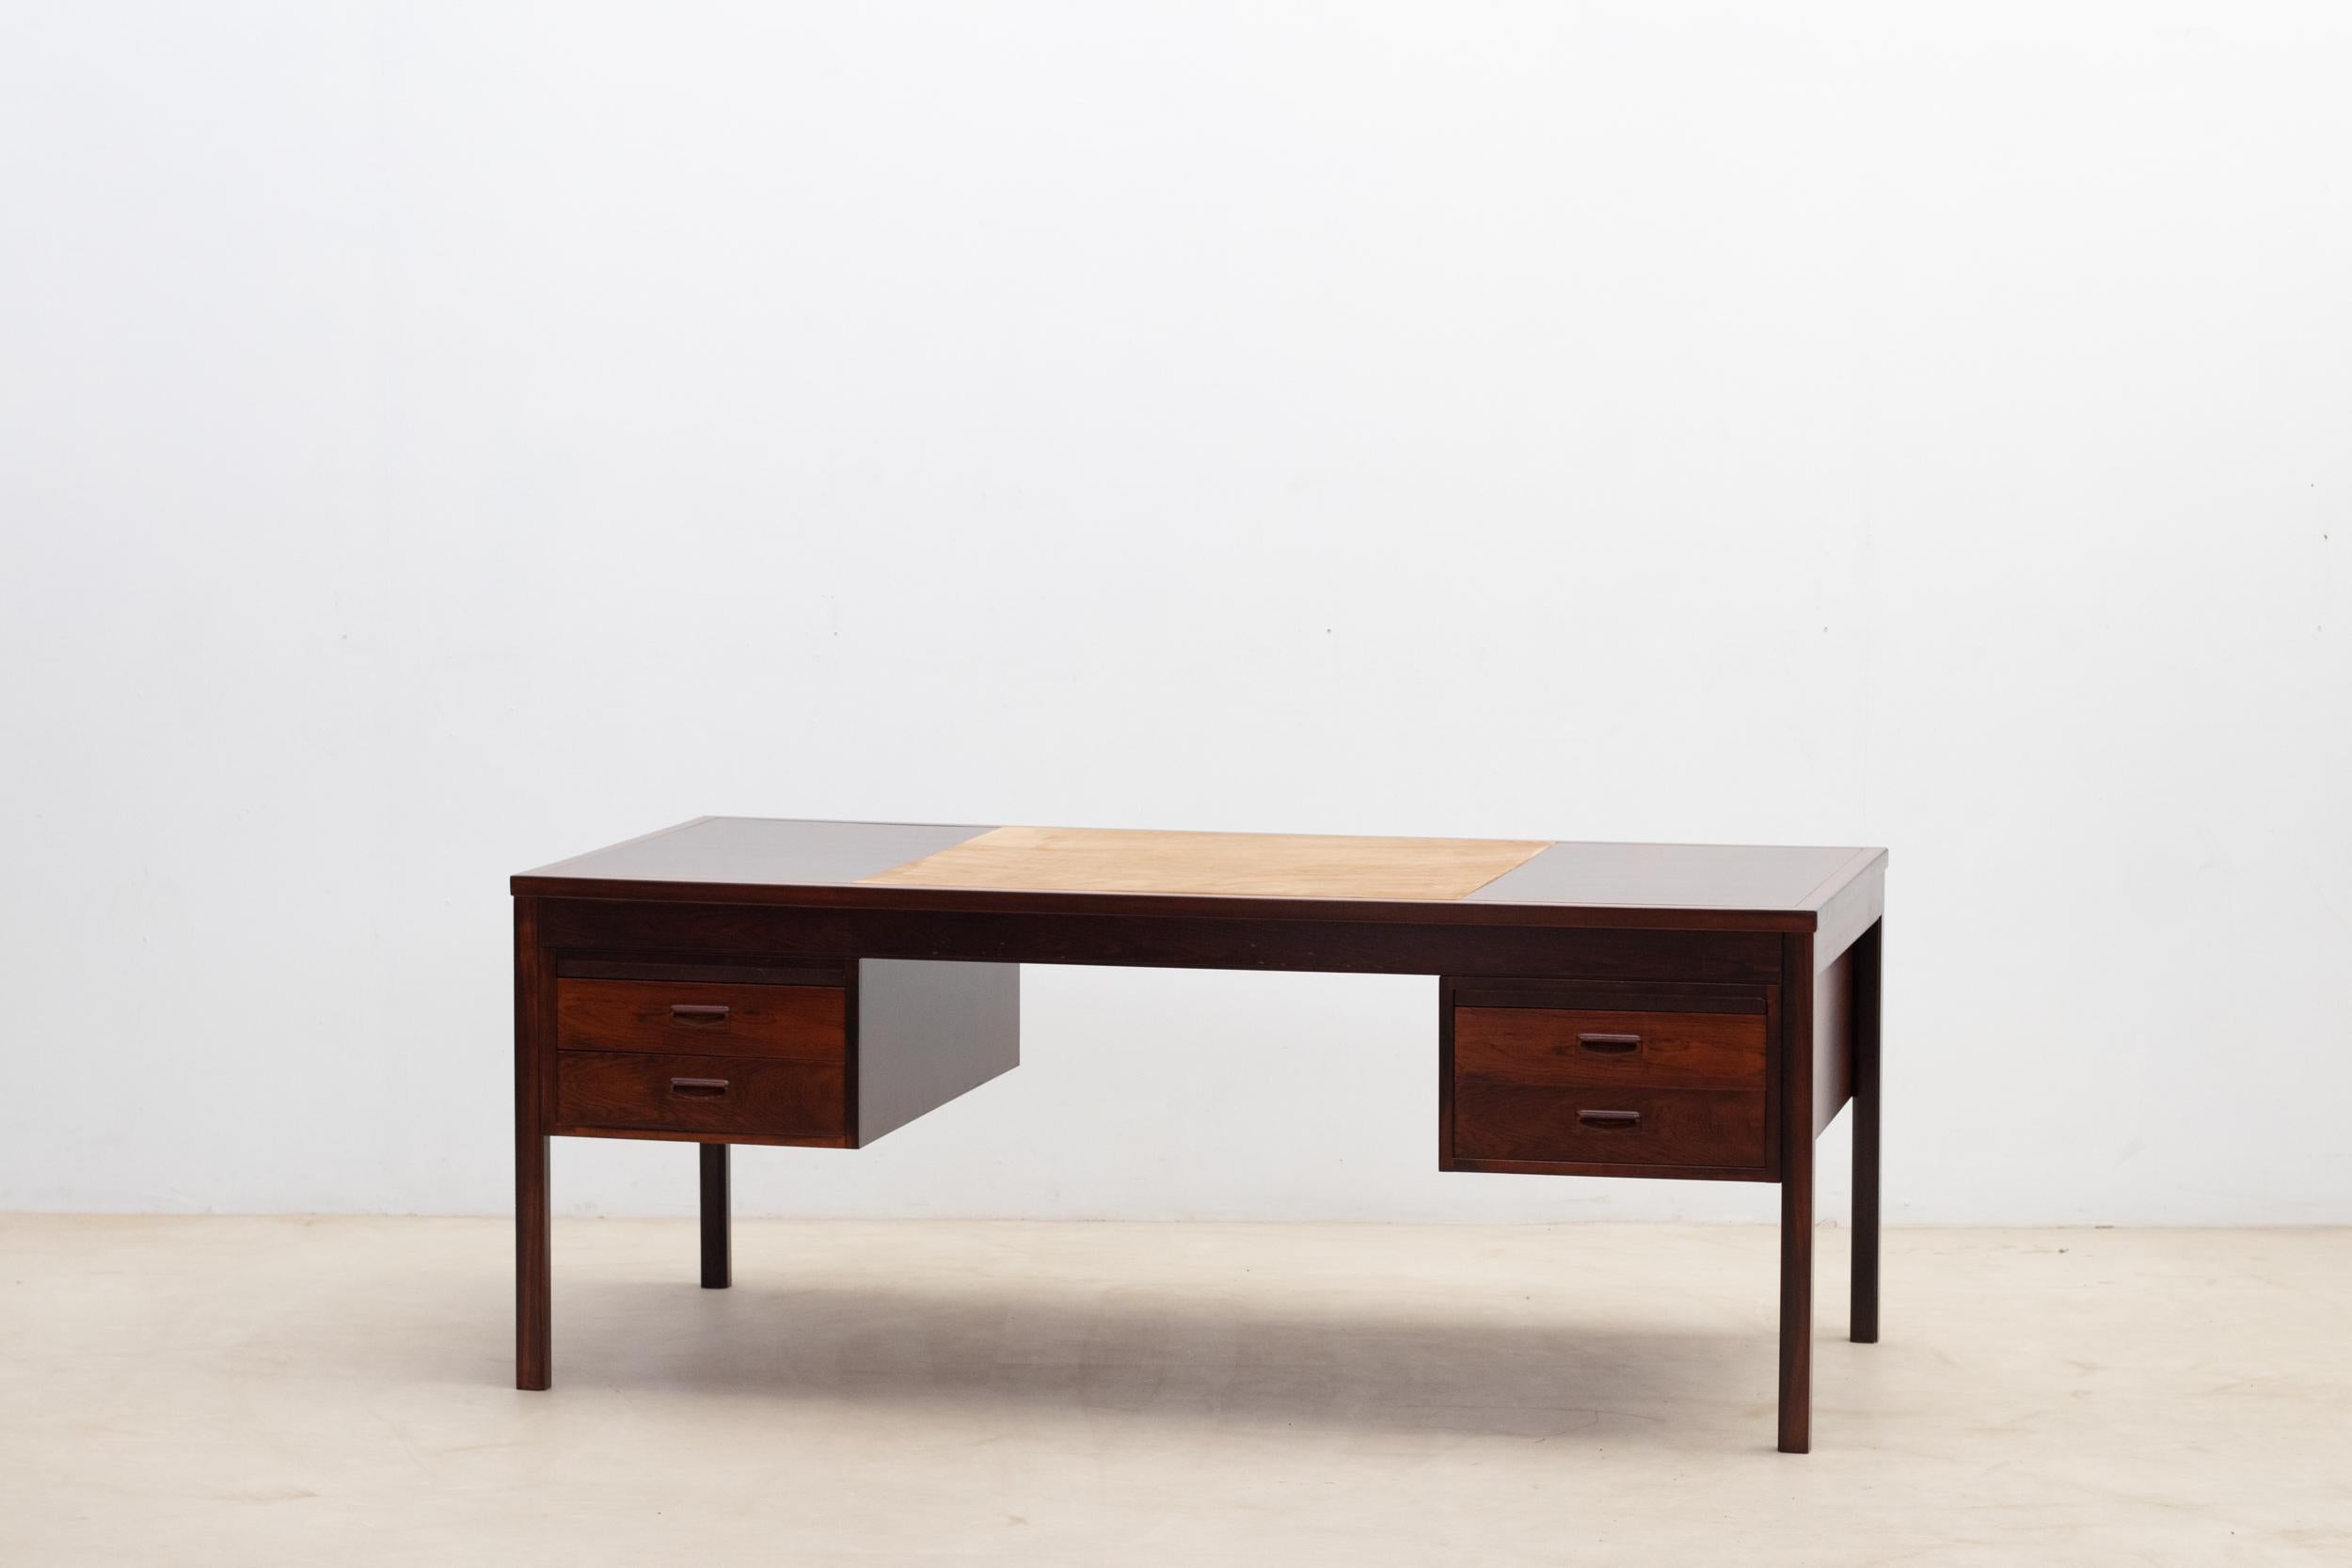 Scandinavian rosewood desk dating back to 1960, showcasing a minimalist design with straight lines. 
On the top, the workspace is covered with leather.
Very good condition.

Do not hesitate to contact us for any additional information. We would be